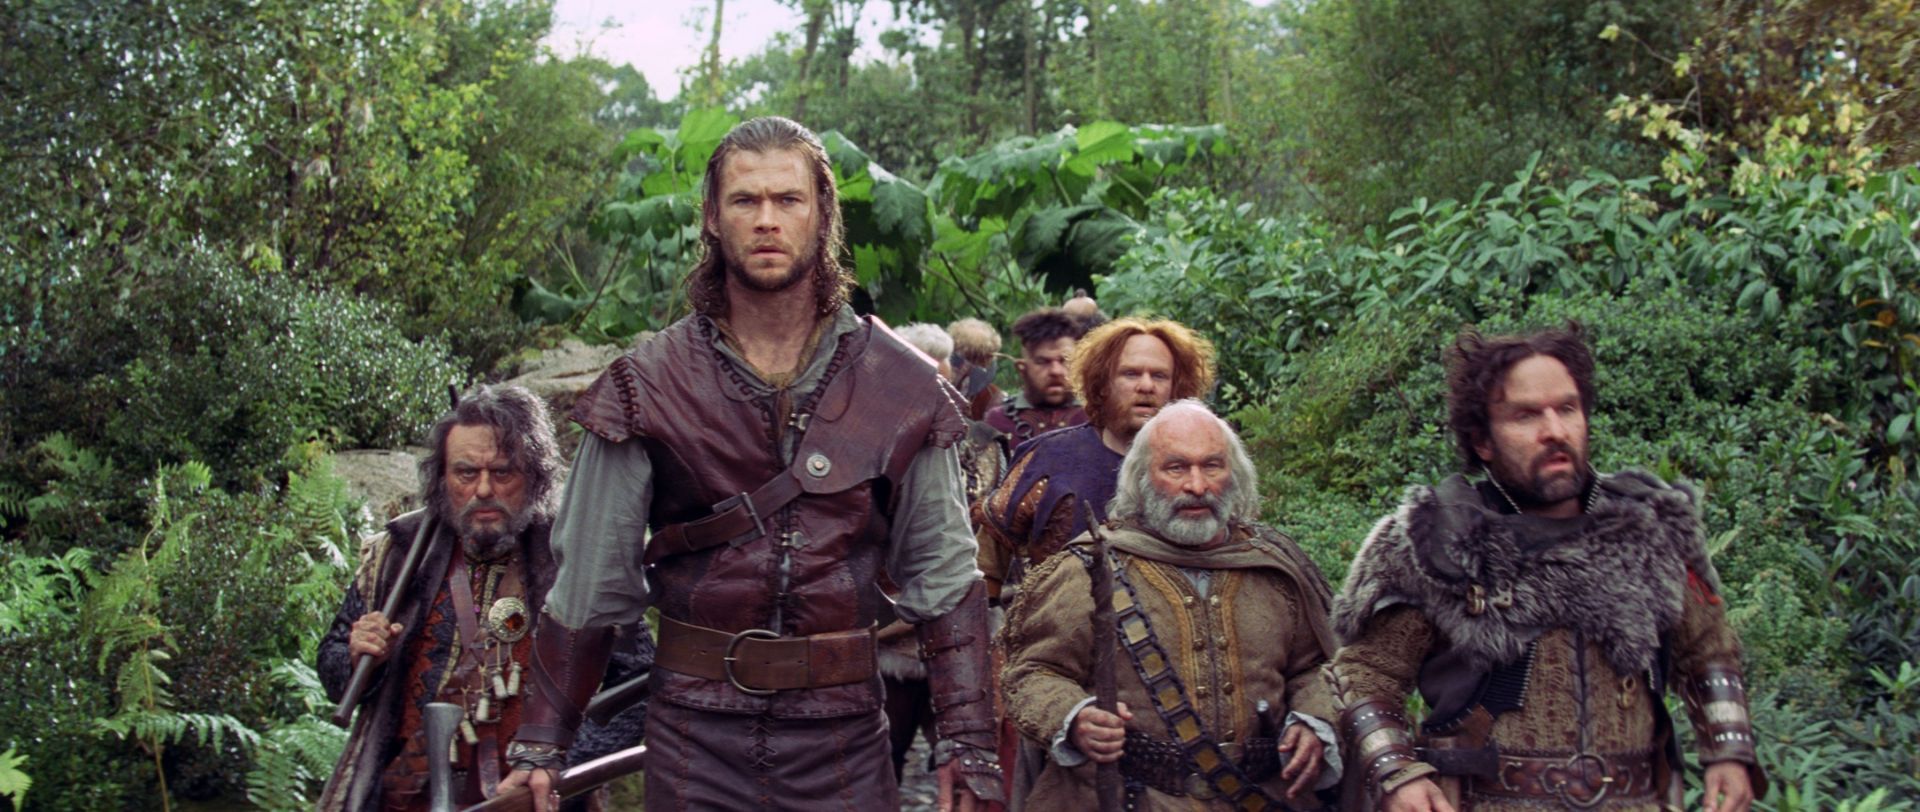 Snow White and the Huntsman Photo #1